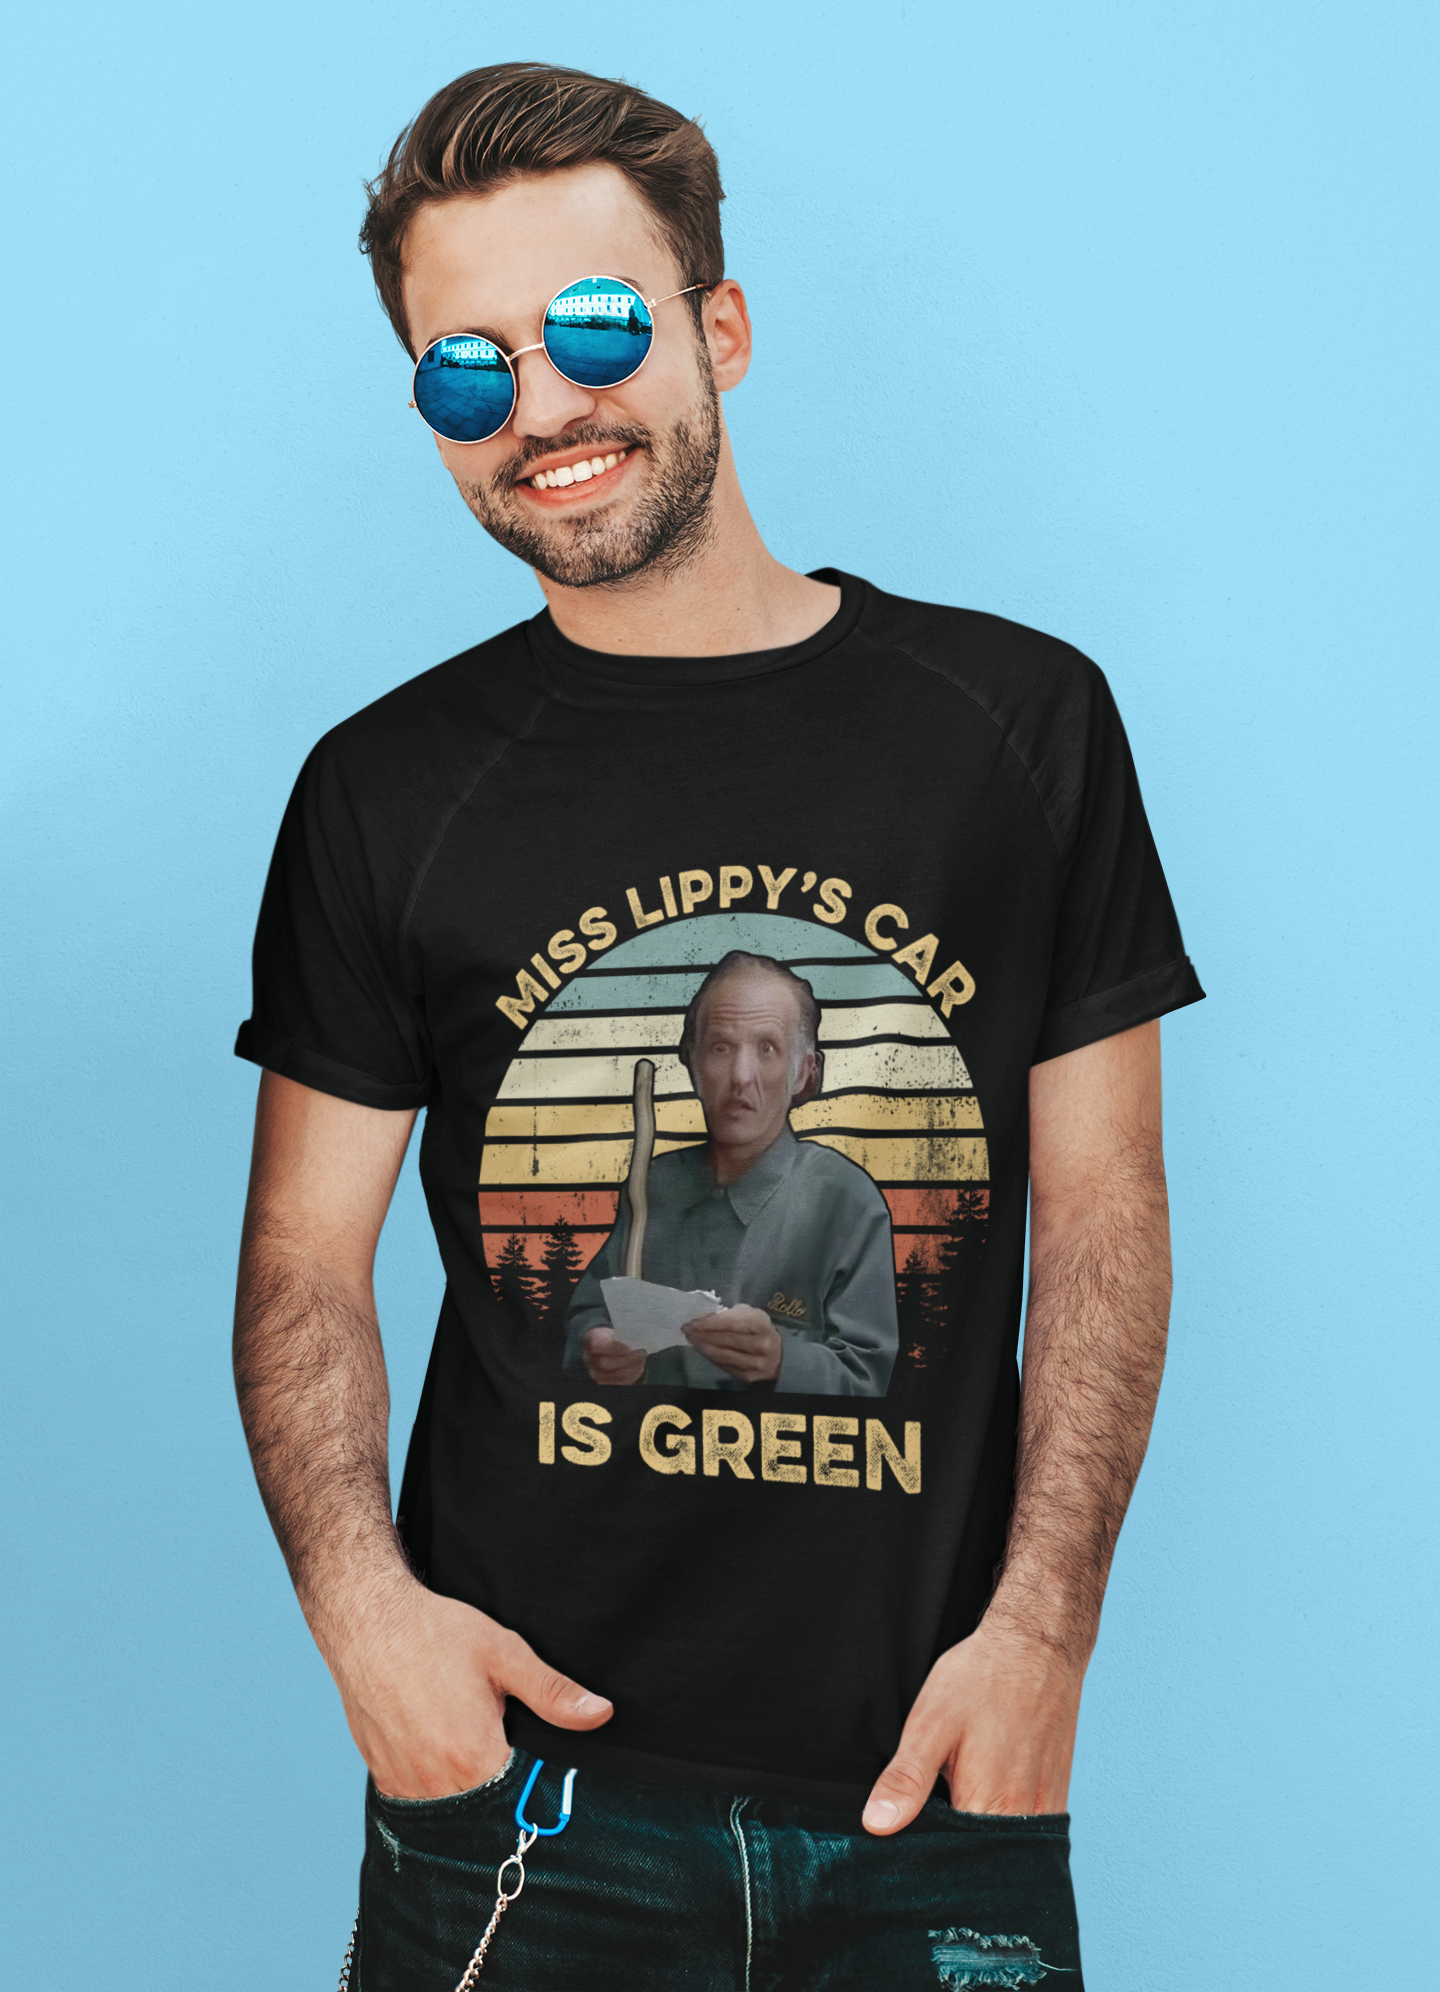 Billy Madison Comedy Film T Shirt, Rollo The Janitor T Shirt, Miss Lippys Car Is Green Tshirt